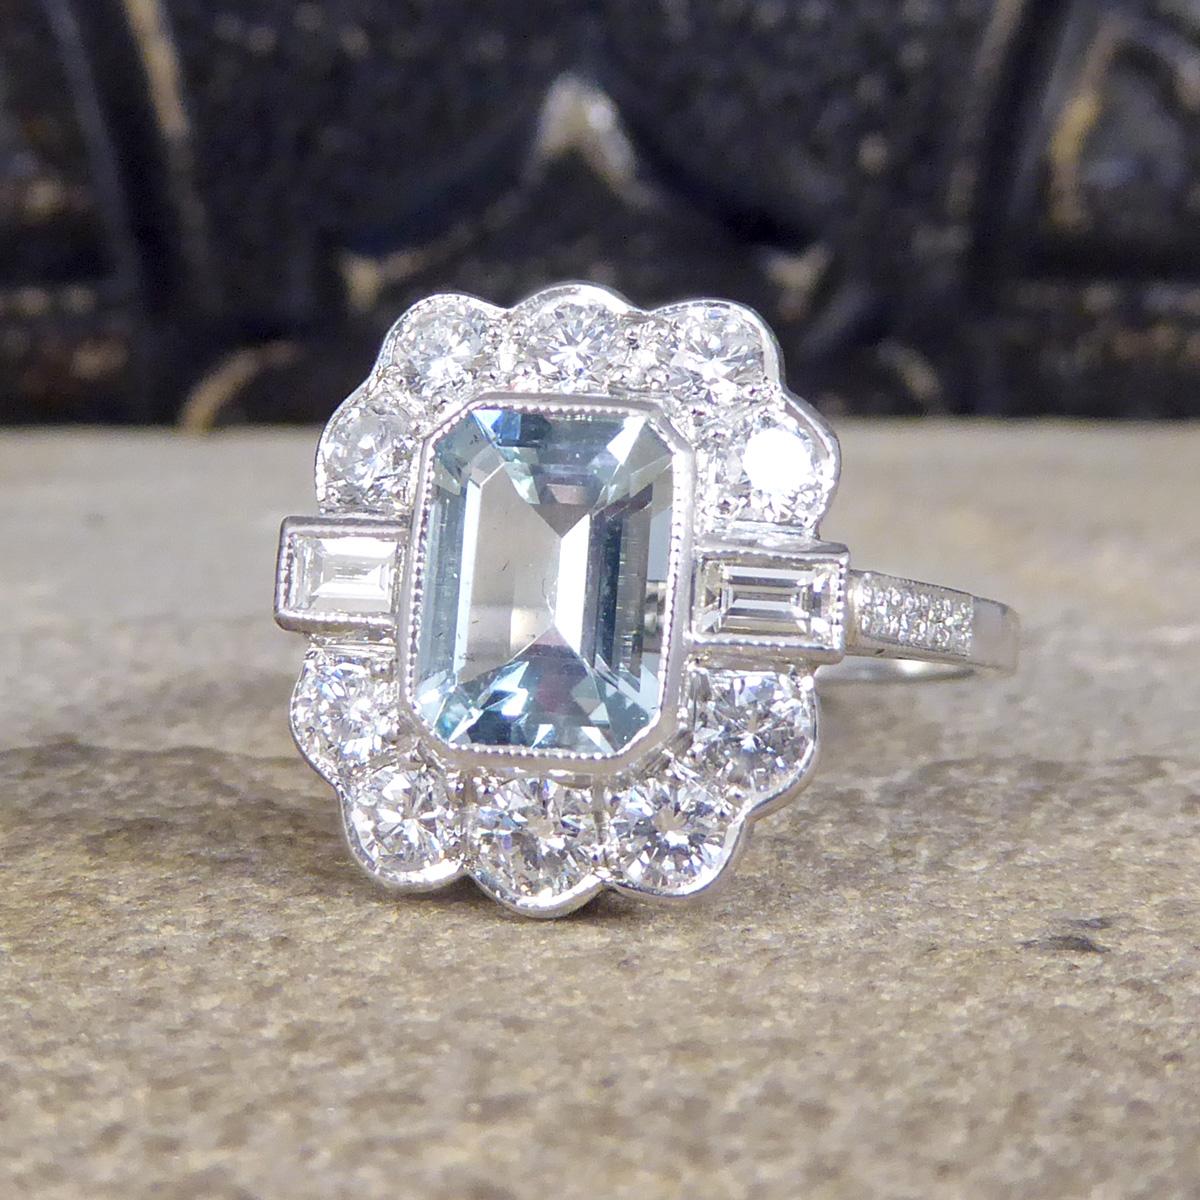 Women's or Men's Contemporary Edwardian Style 1.30ct Aquamarine and Diamond Ring in Platinum